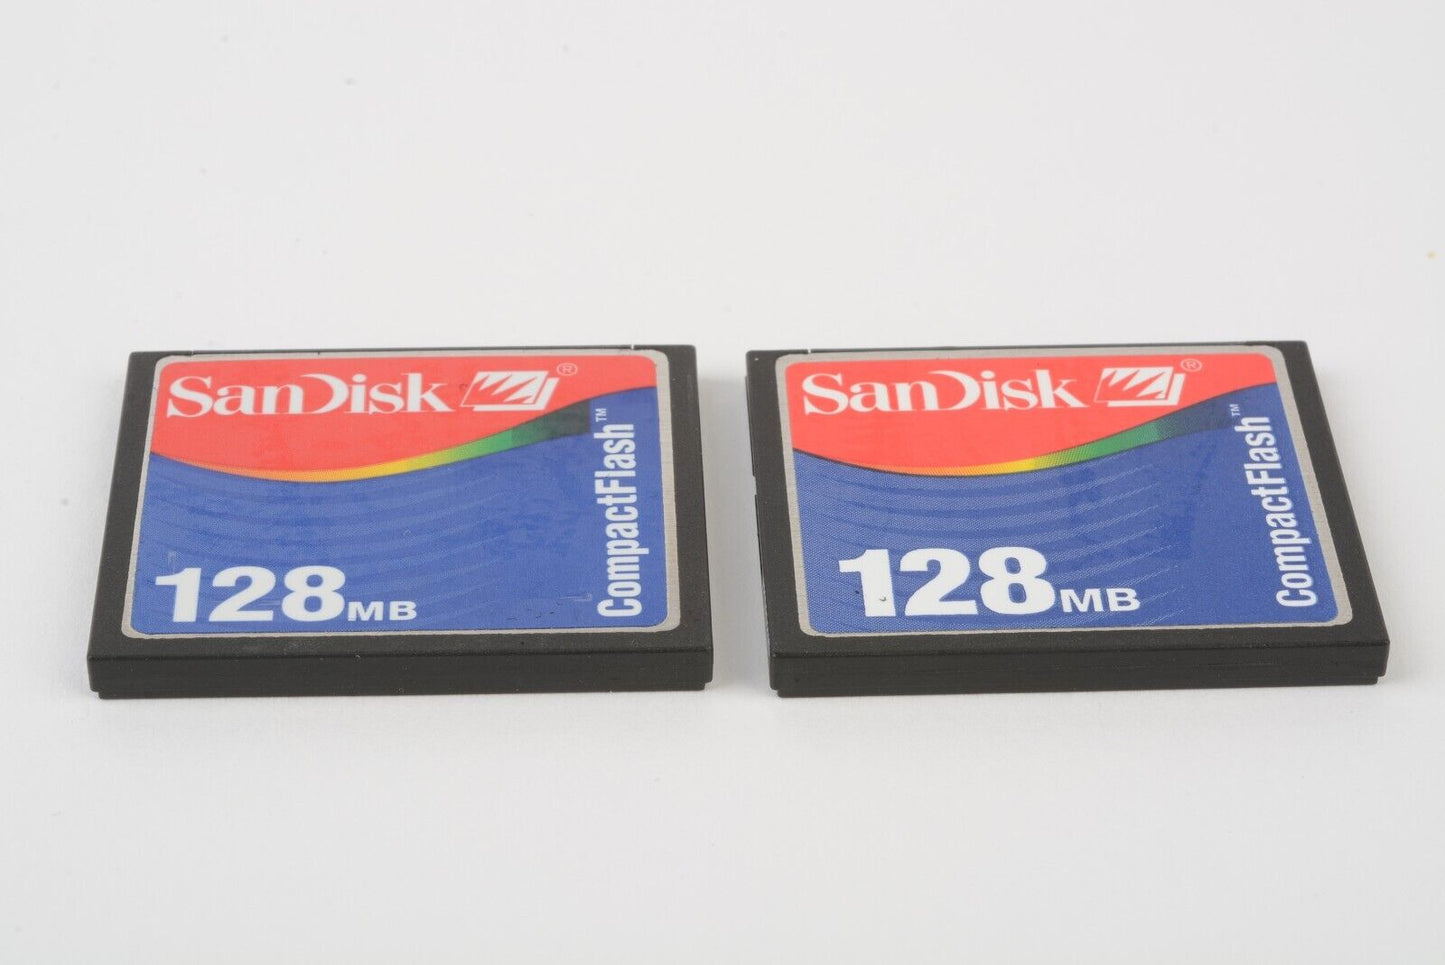 SET OF 2 EXC++ SANDISK 128MB COMPACTFLASH CF MEMORY CARD SDCFB-128 w/POUCH